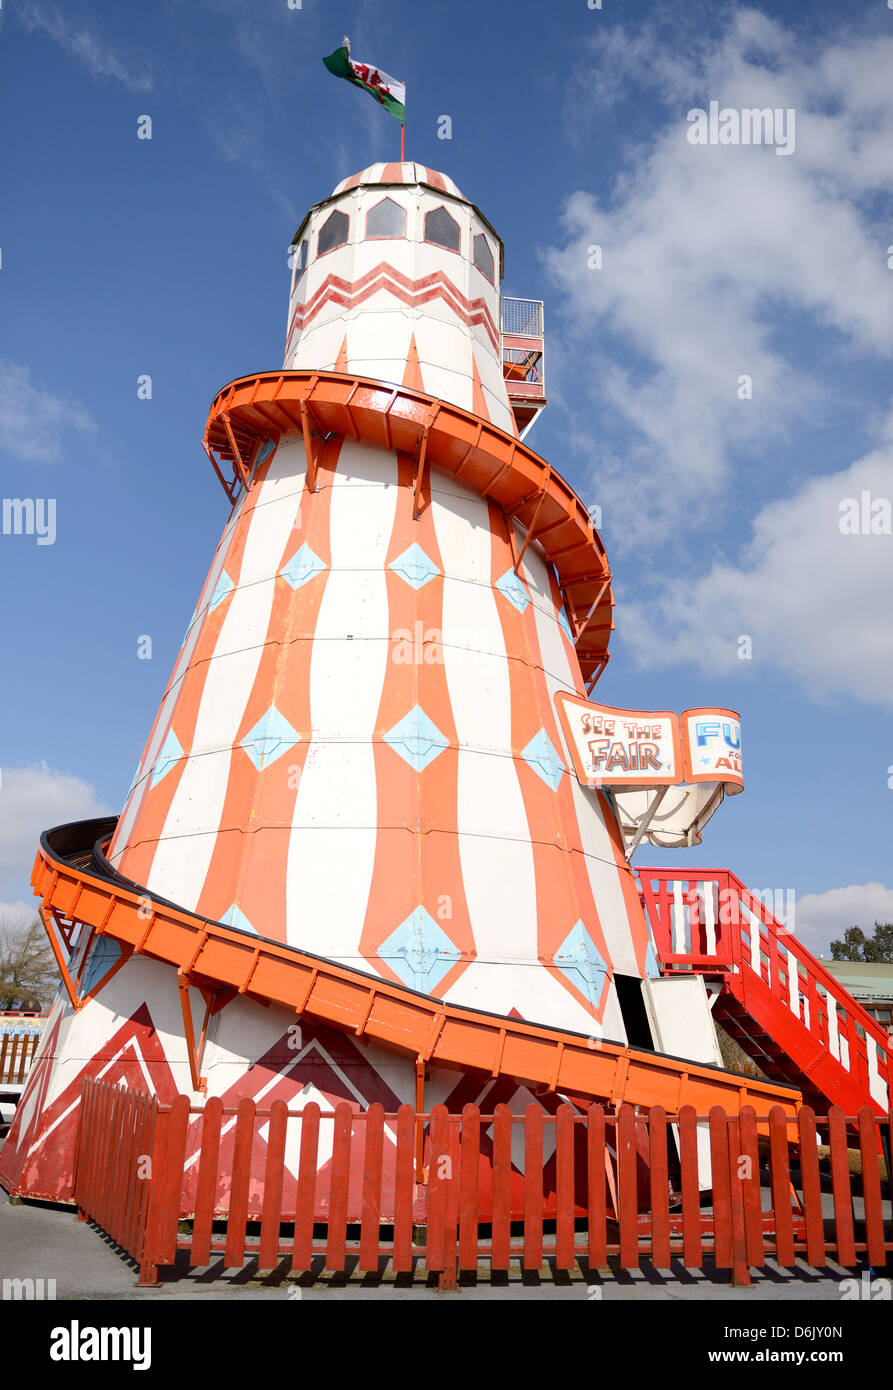 a fun helter skelter at a fairground on a sunny day Stock Photo